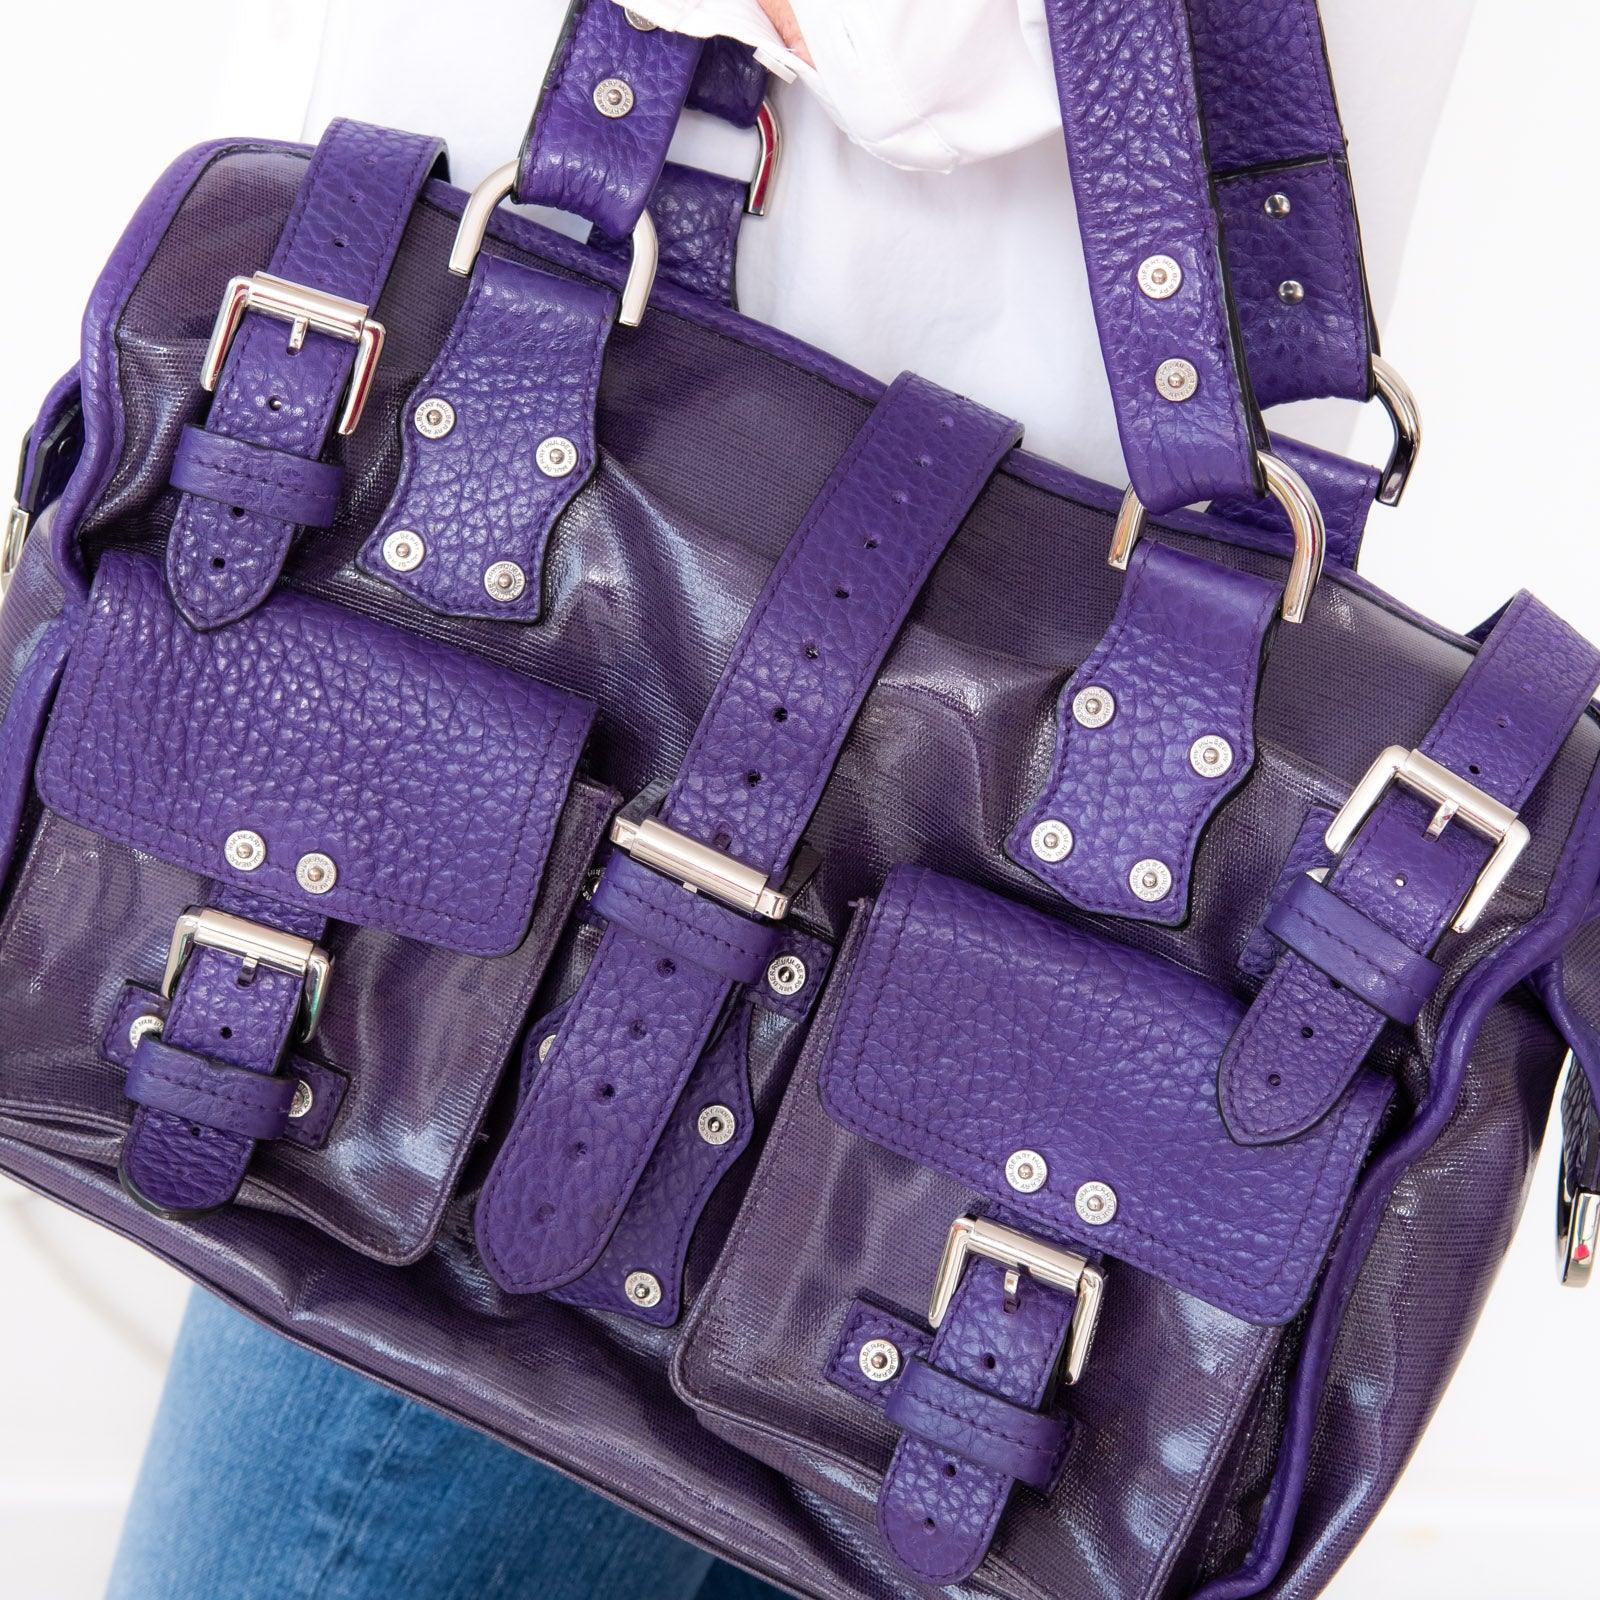 Mulberry Roxanne Purple Bag - Image 5 of 7